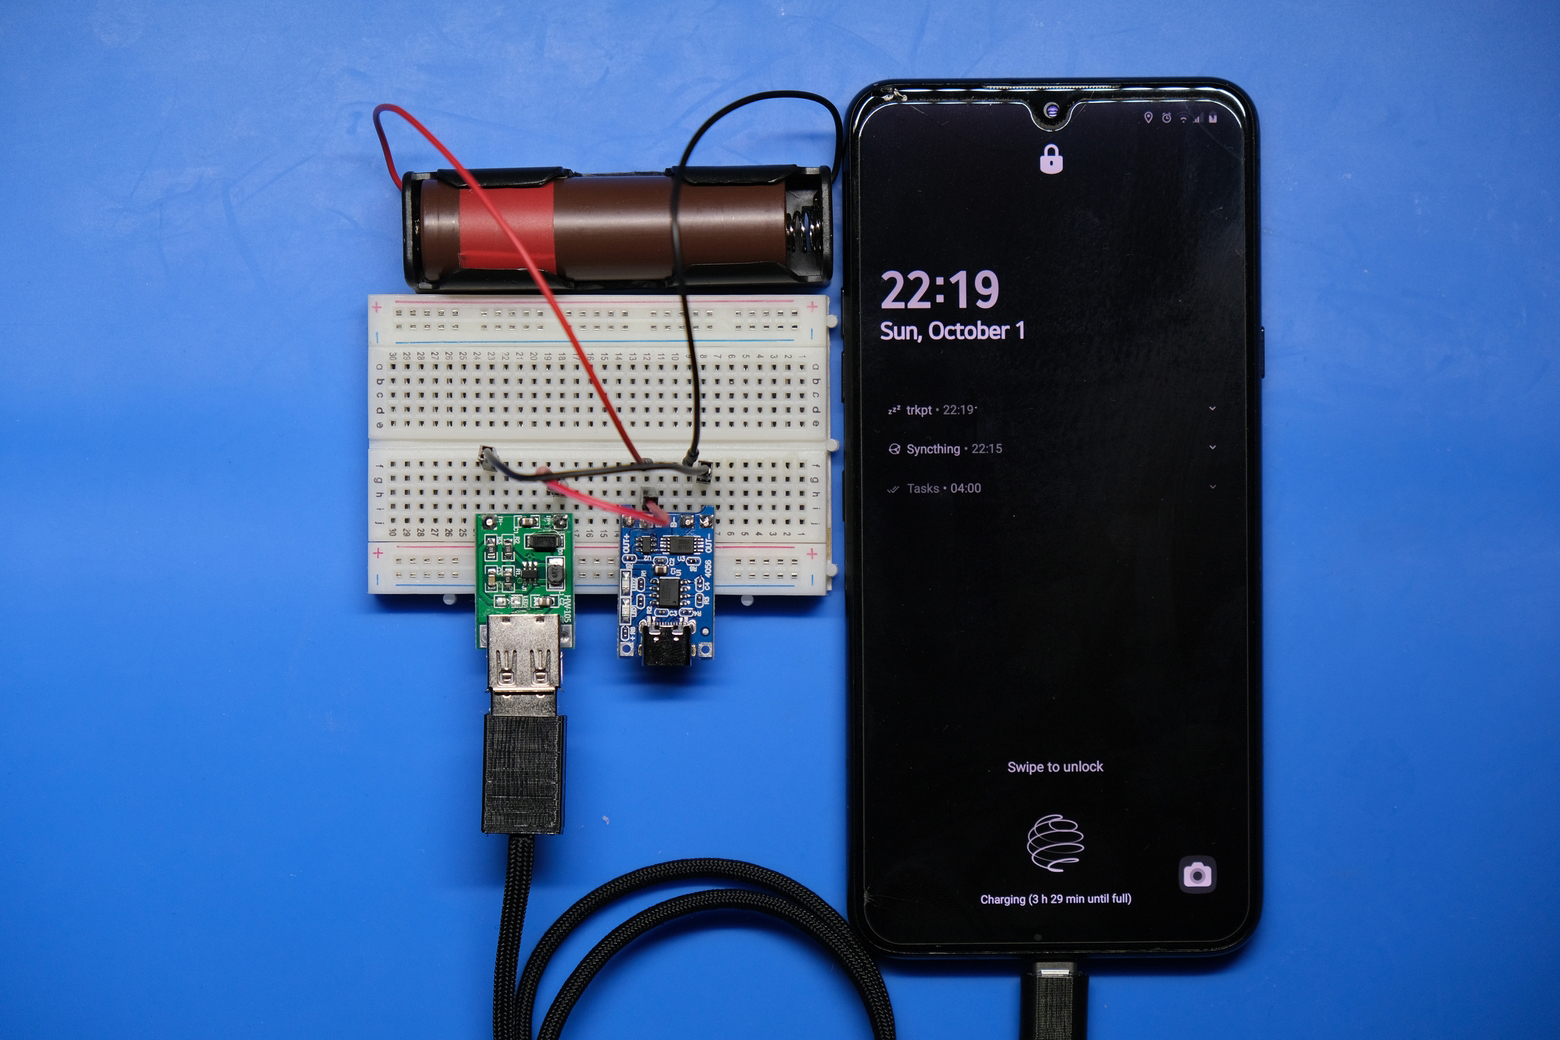 Photograph of a breadboard containing a TP4056 charge controller, a 5 V USB regulator, and an 18650 battery cell. A cable connects this breadboard to a cell phone which is being charged.